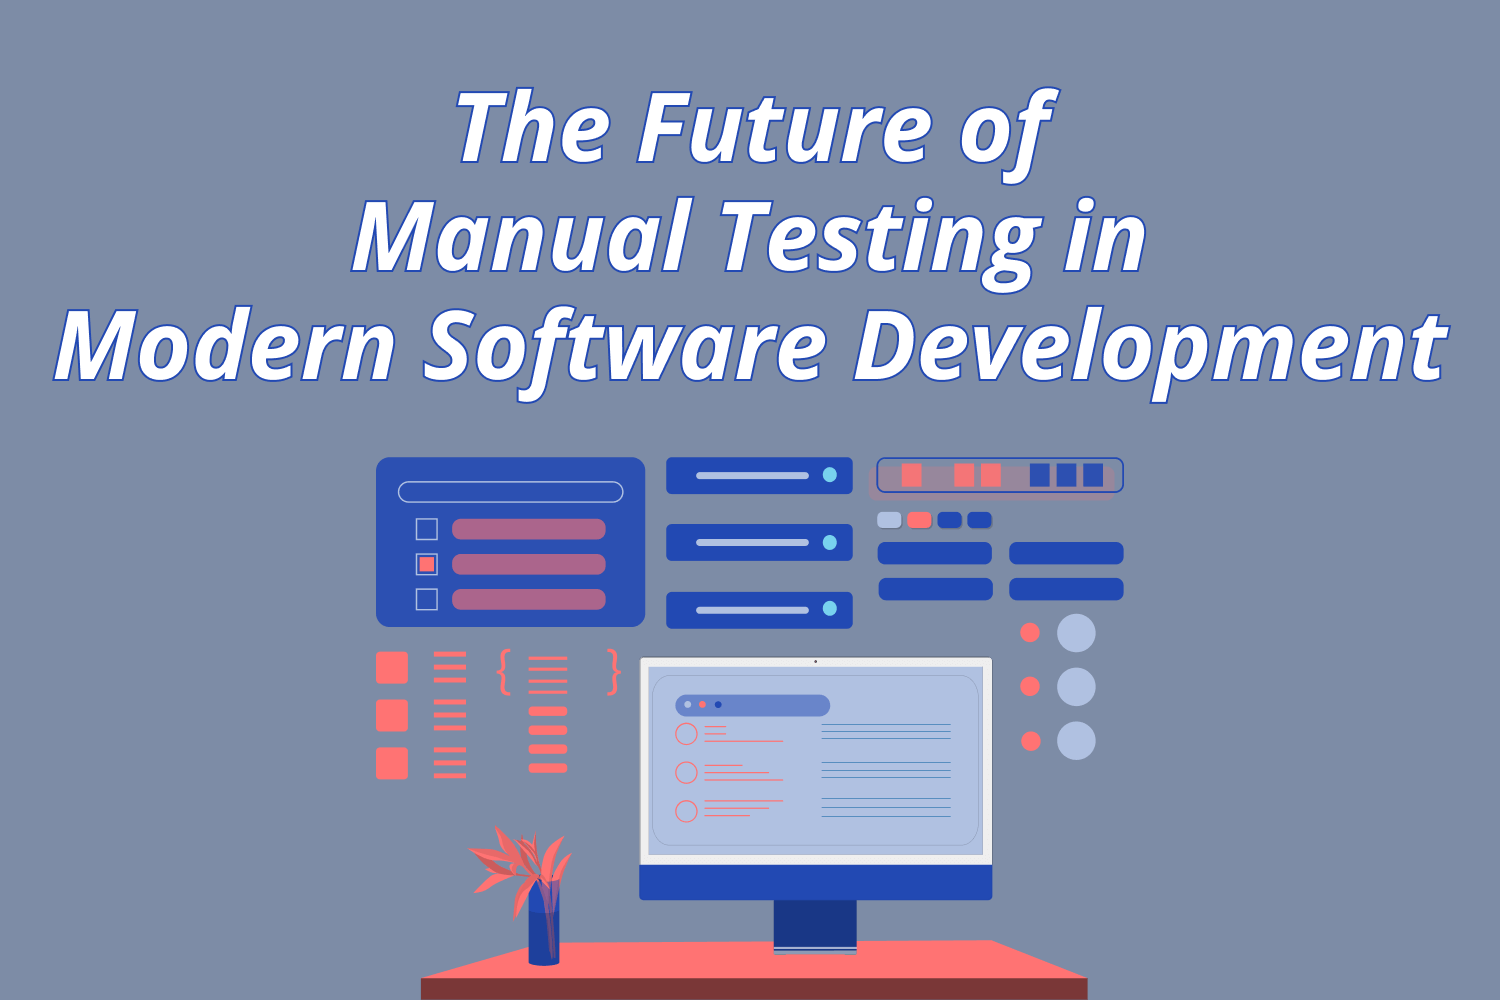 The Future of Manual Testing in Modern Software Development